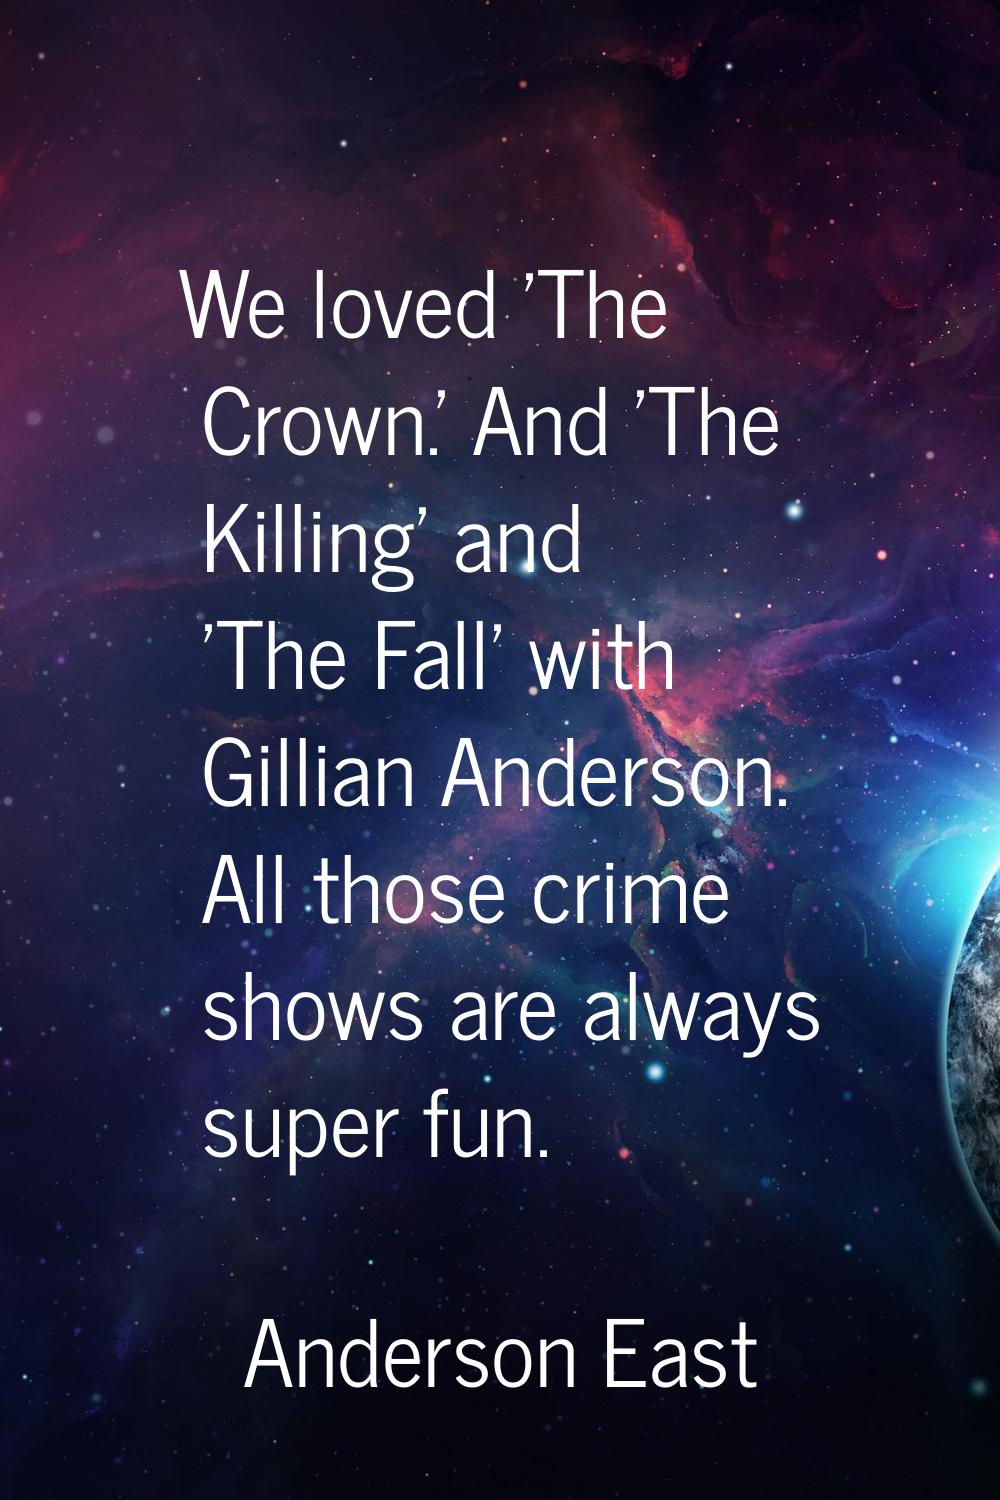 We loved 'The Crown.' And 'The Killing' and 'The Fall' with Gillian Anderson. All those crime shows